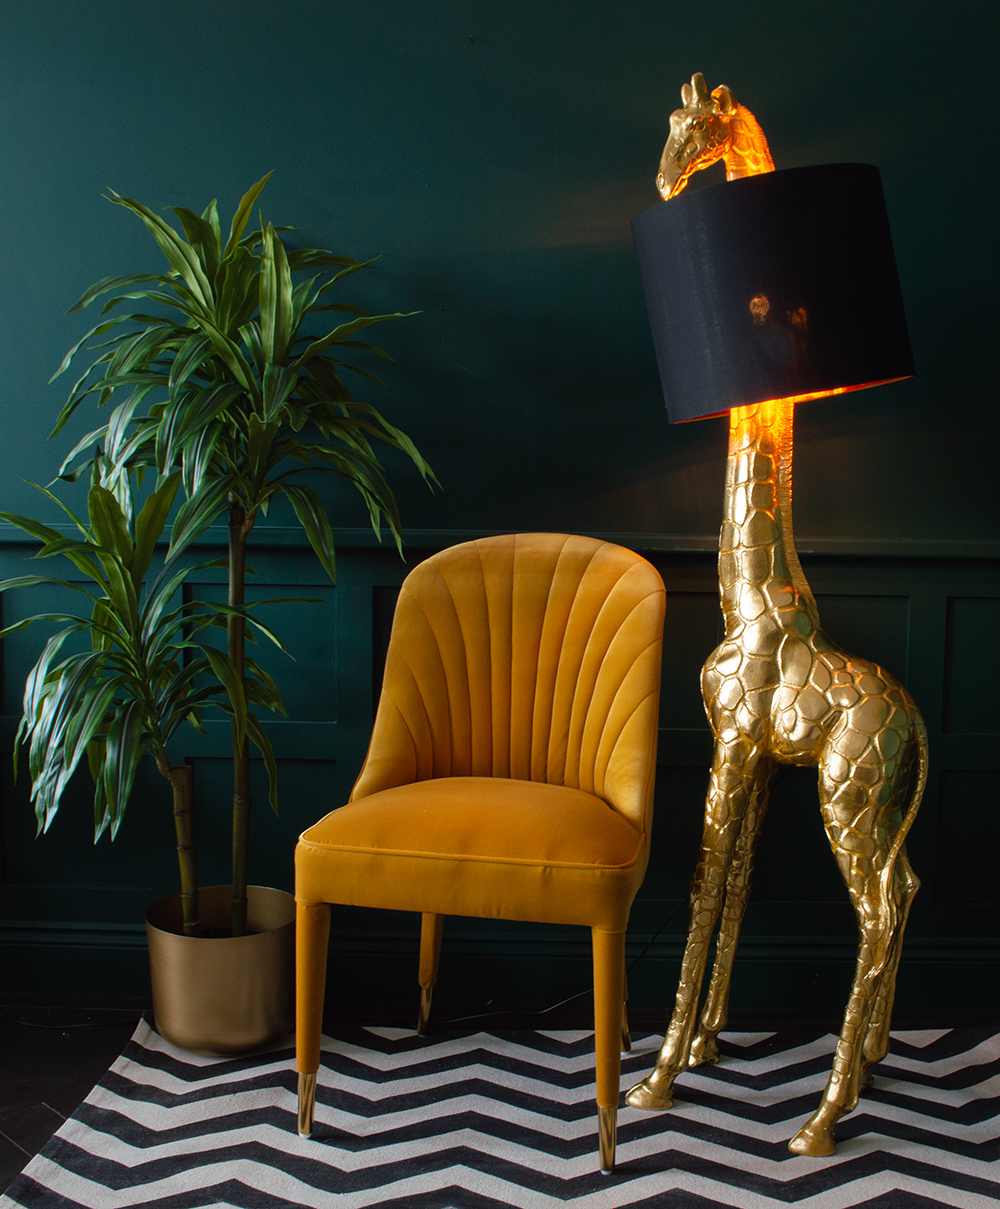 Interior design advice, how to choose lighting, from quirky animal lamps, to tropical palm tree floor lights. Read our tips to help you choose lighting for your home.